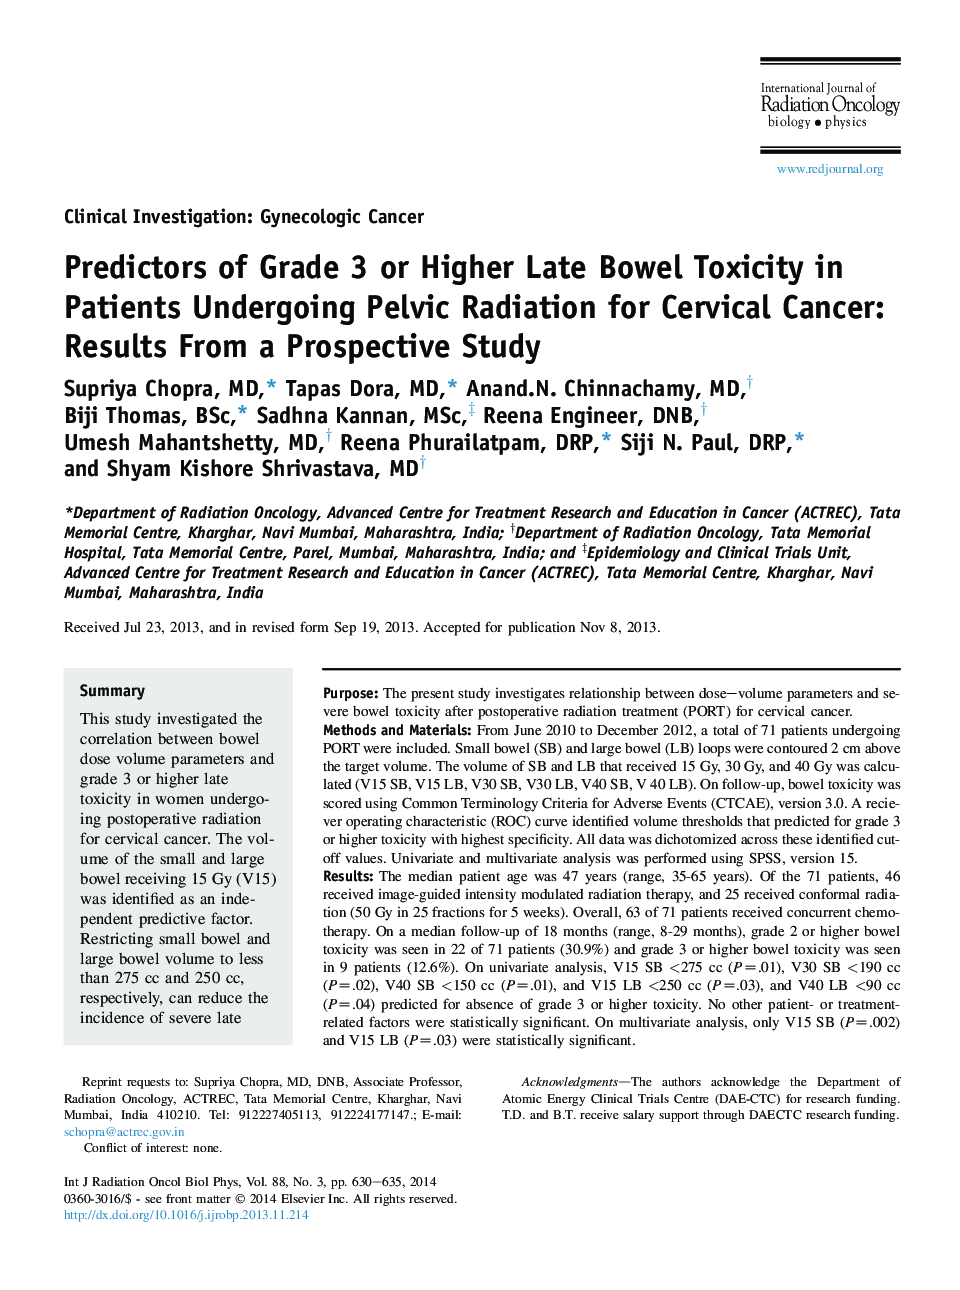 Predictors of Grade 3 or Higher Late Bowel Toxicity in Patients Undergoing Pelvic Radiation for Cervical Cancer: Results From a Prospective Study